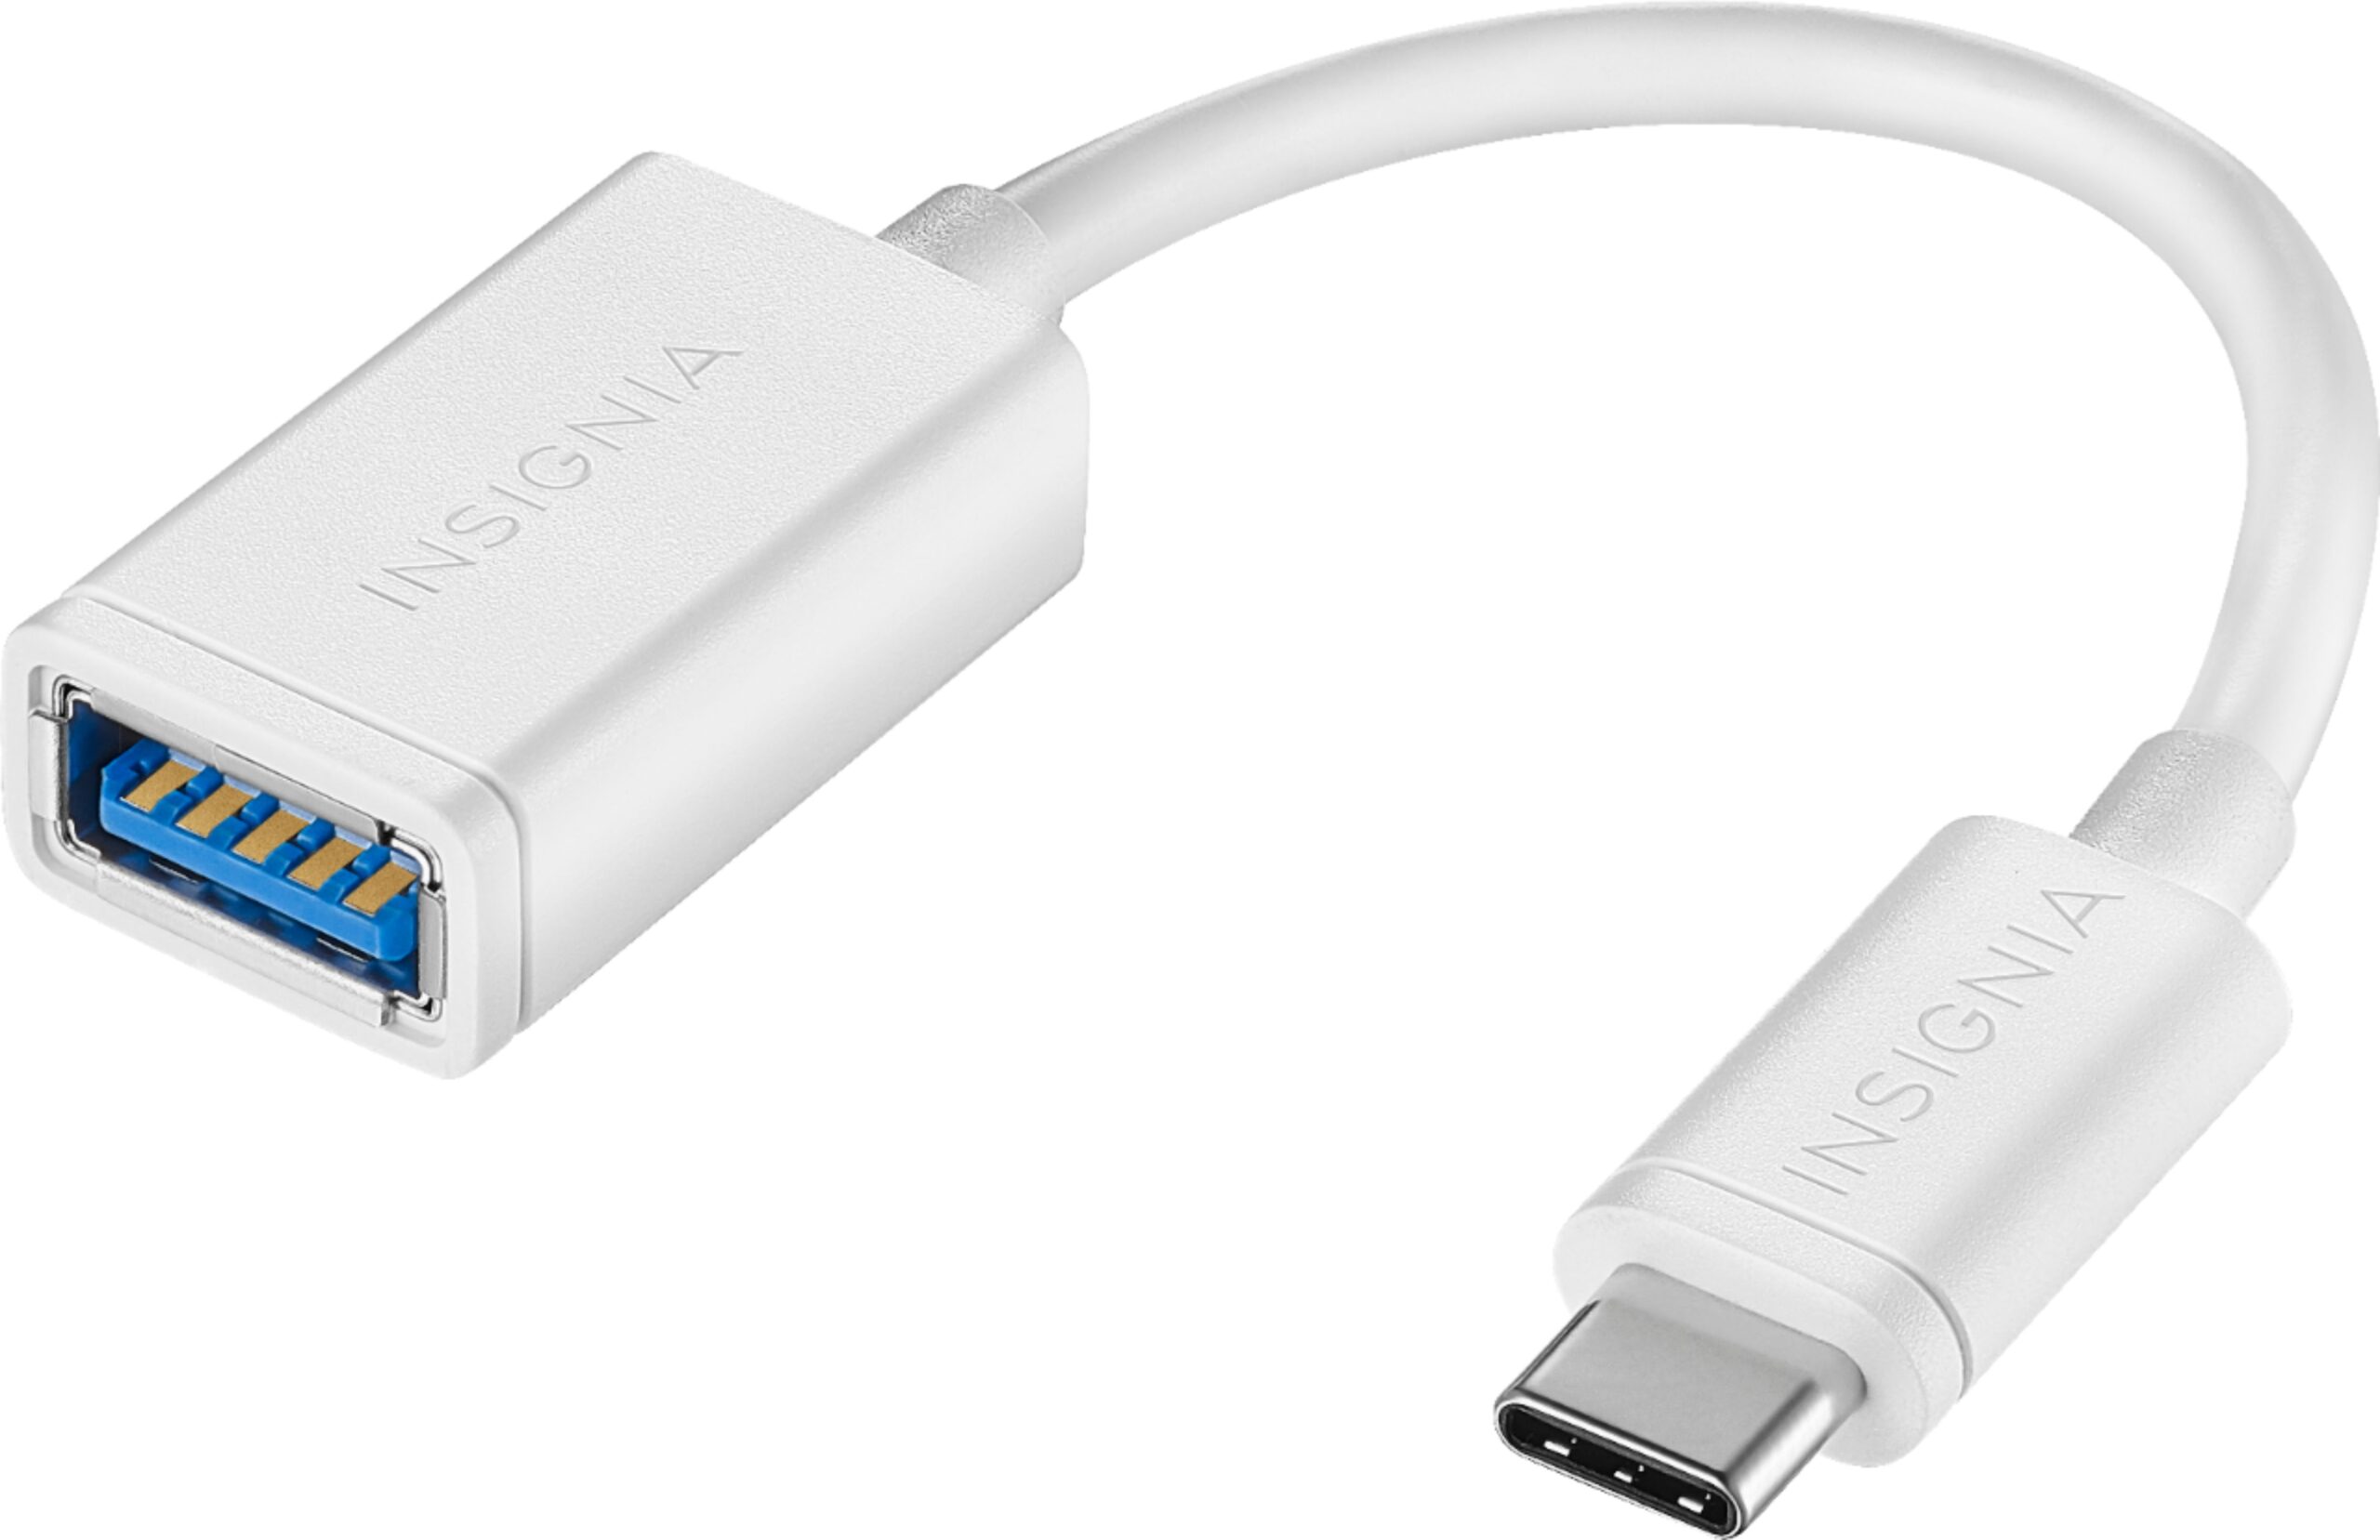 A Quick Guide to Understanding USB Type C Cables